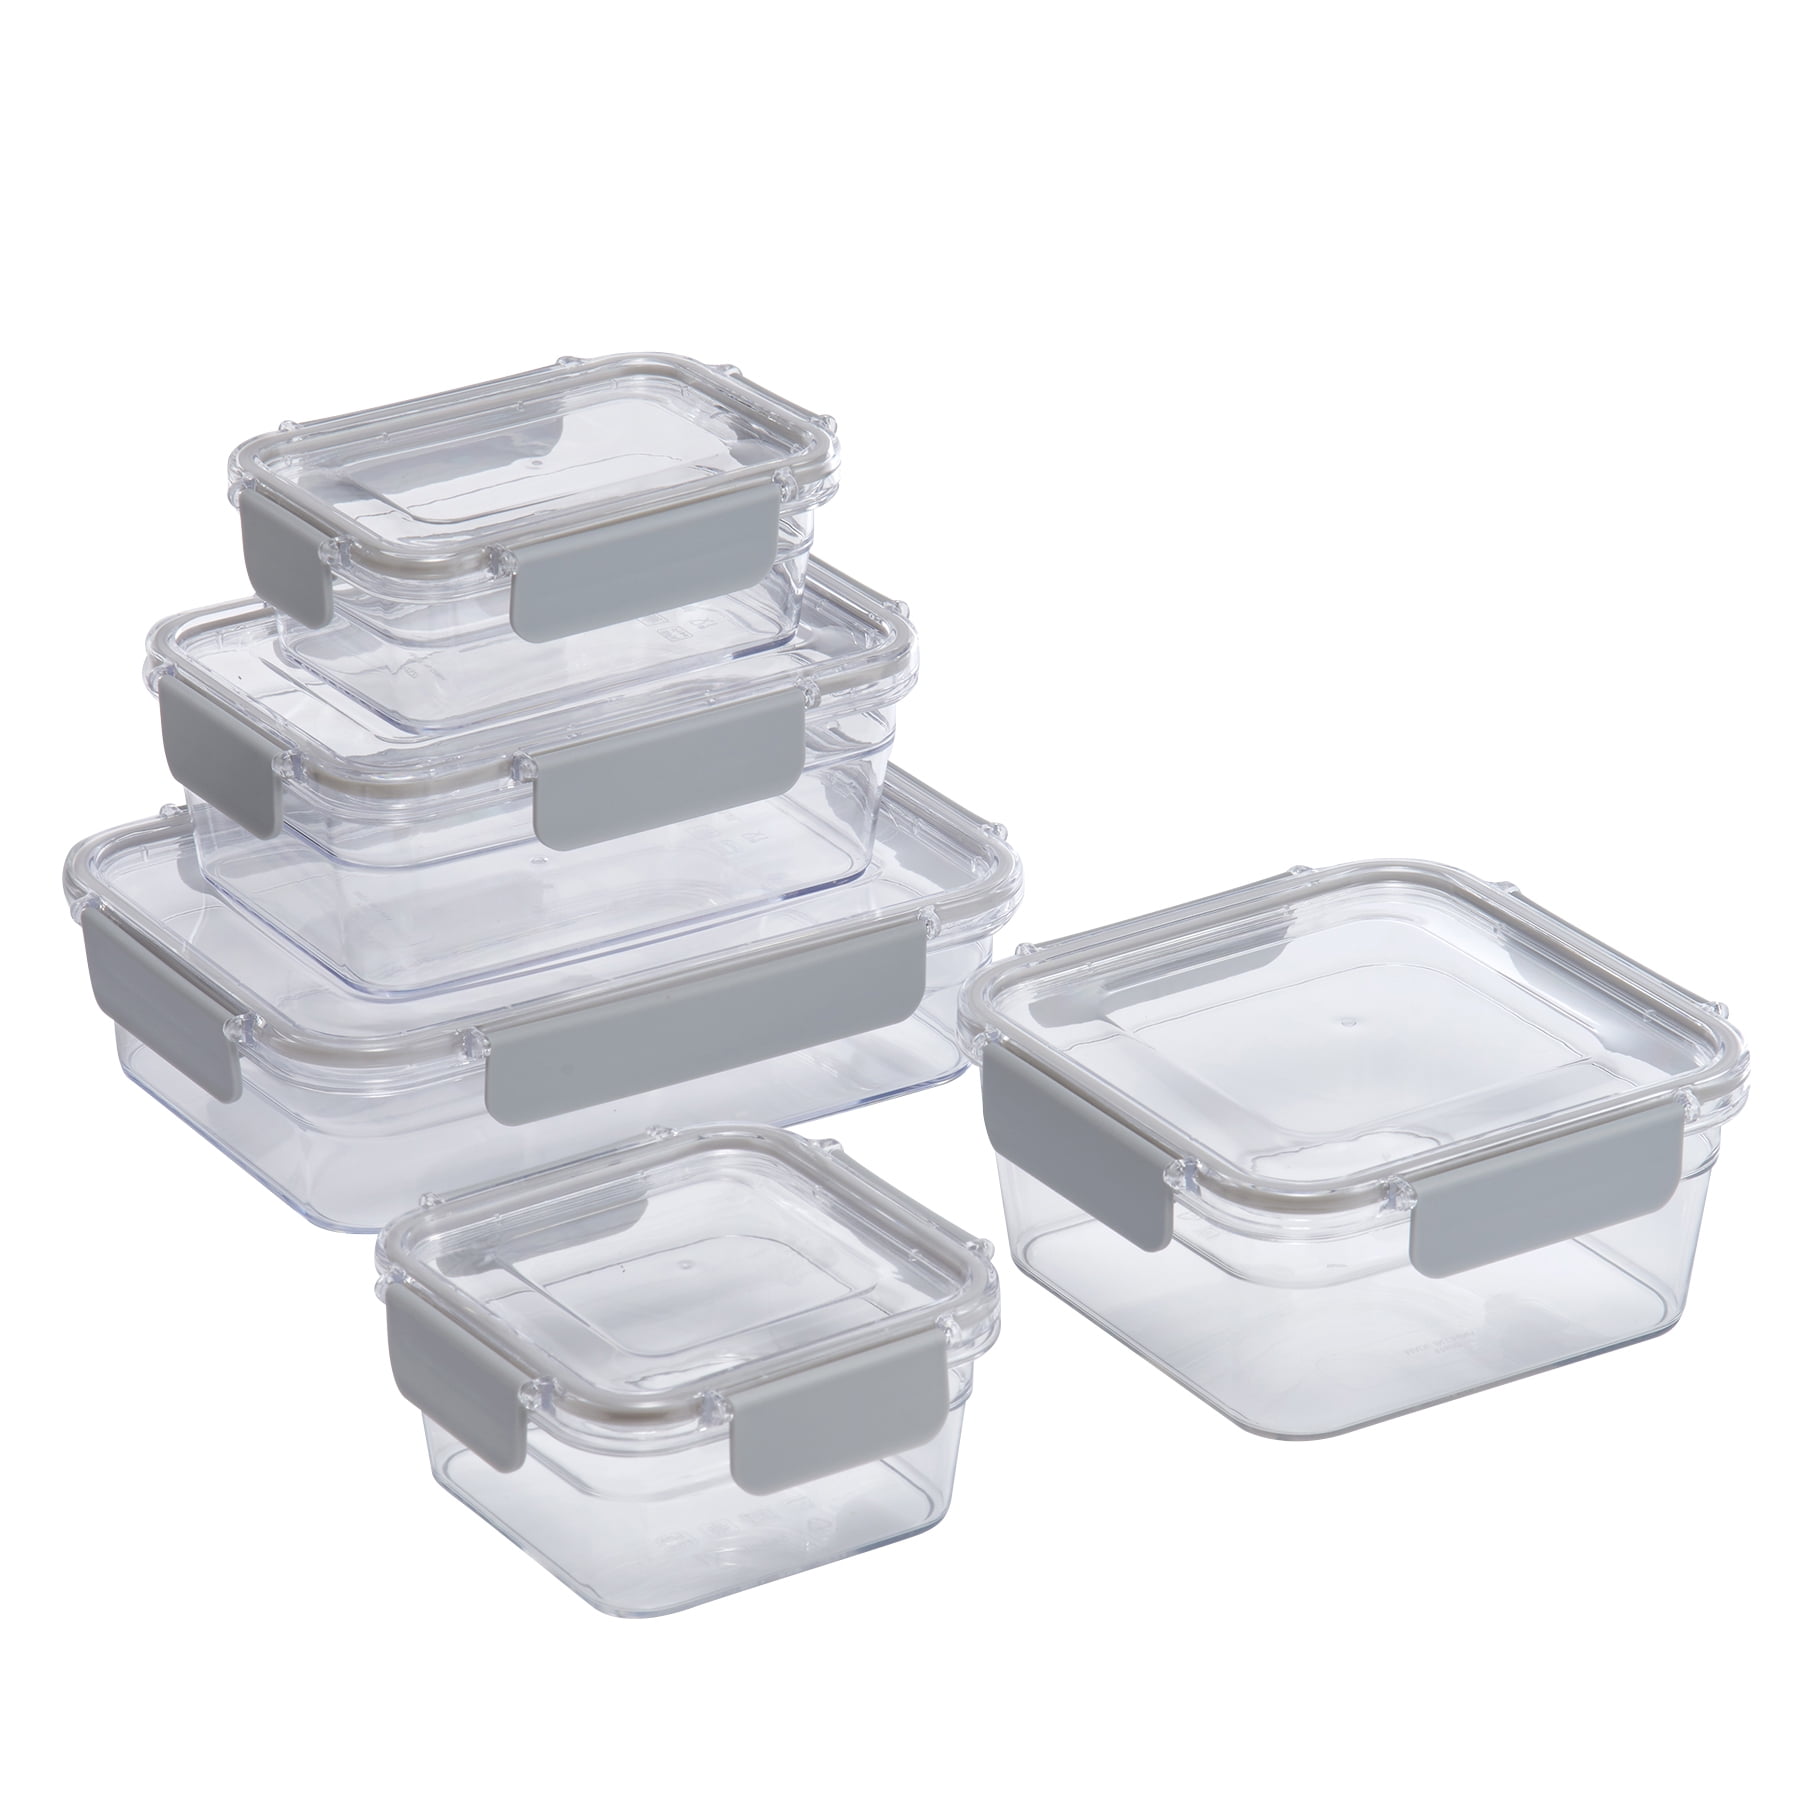 Mainstays 5 Pack Tritan Food Storage Container, Clear with Soft Silver Latches, 5 Sizes With Total 4.39L